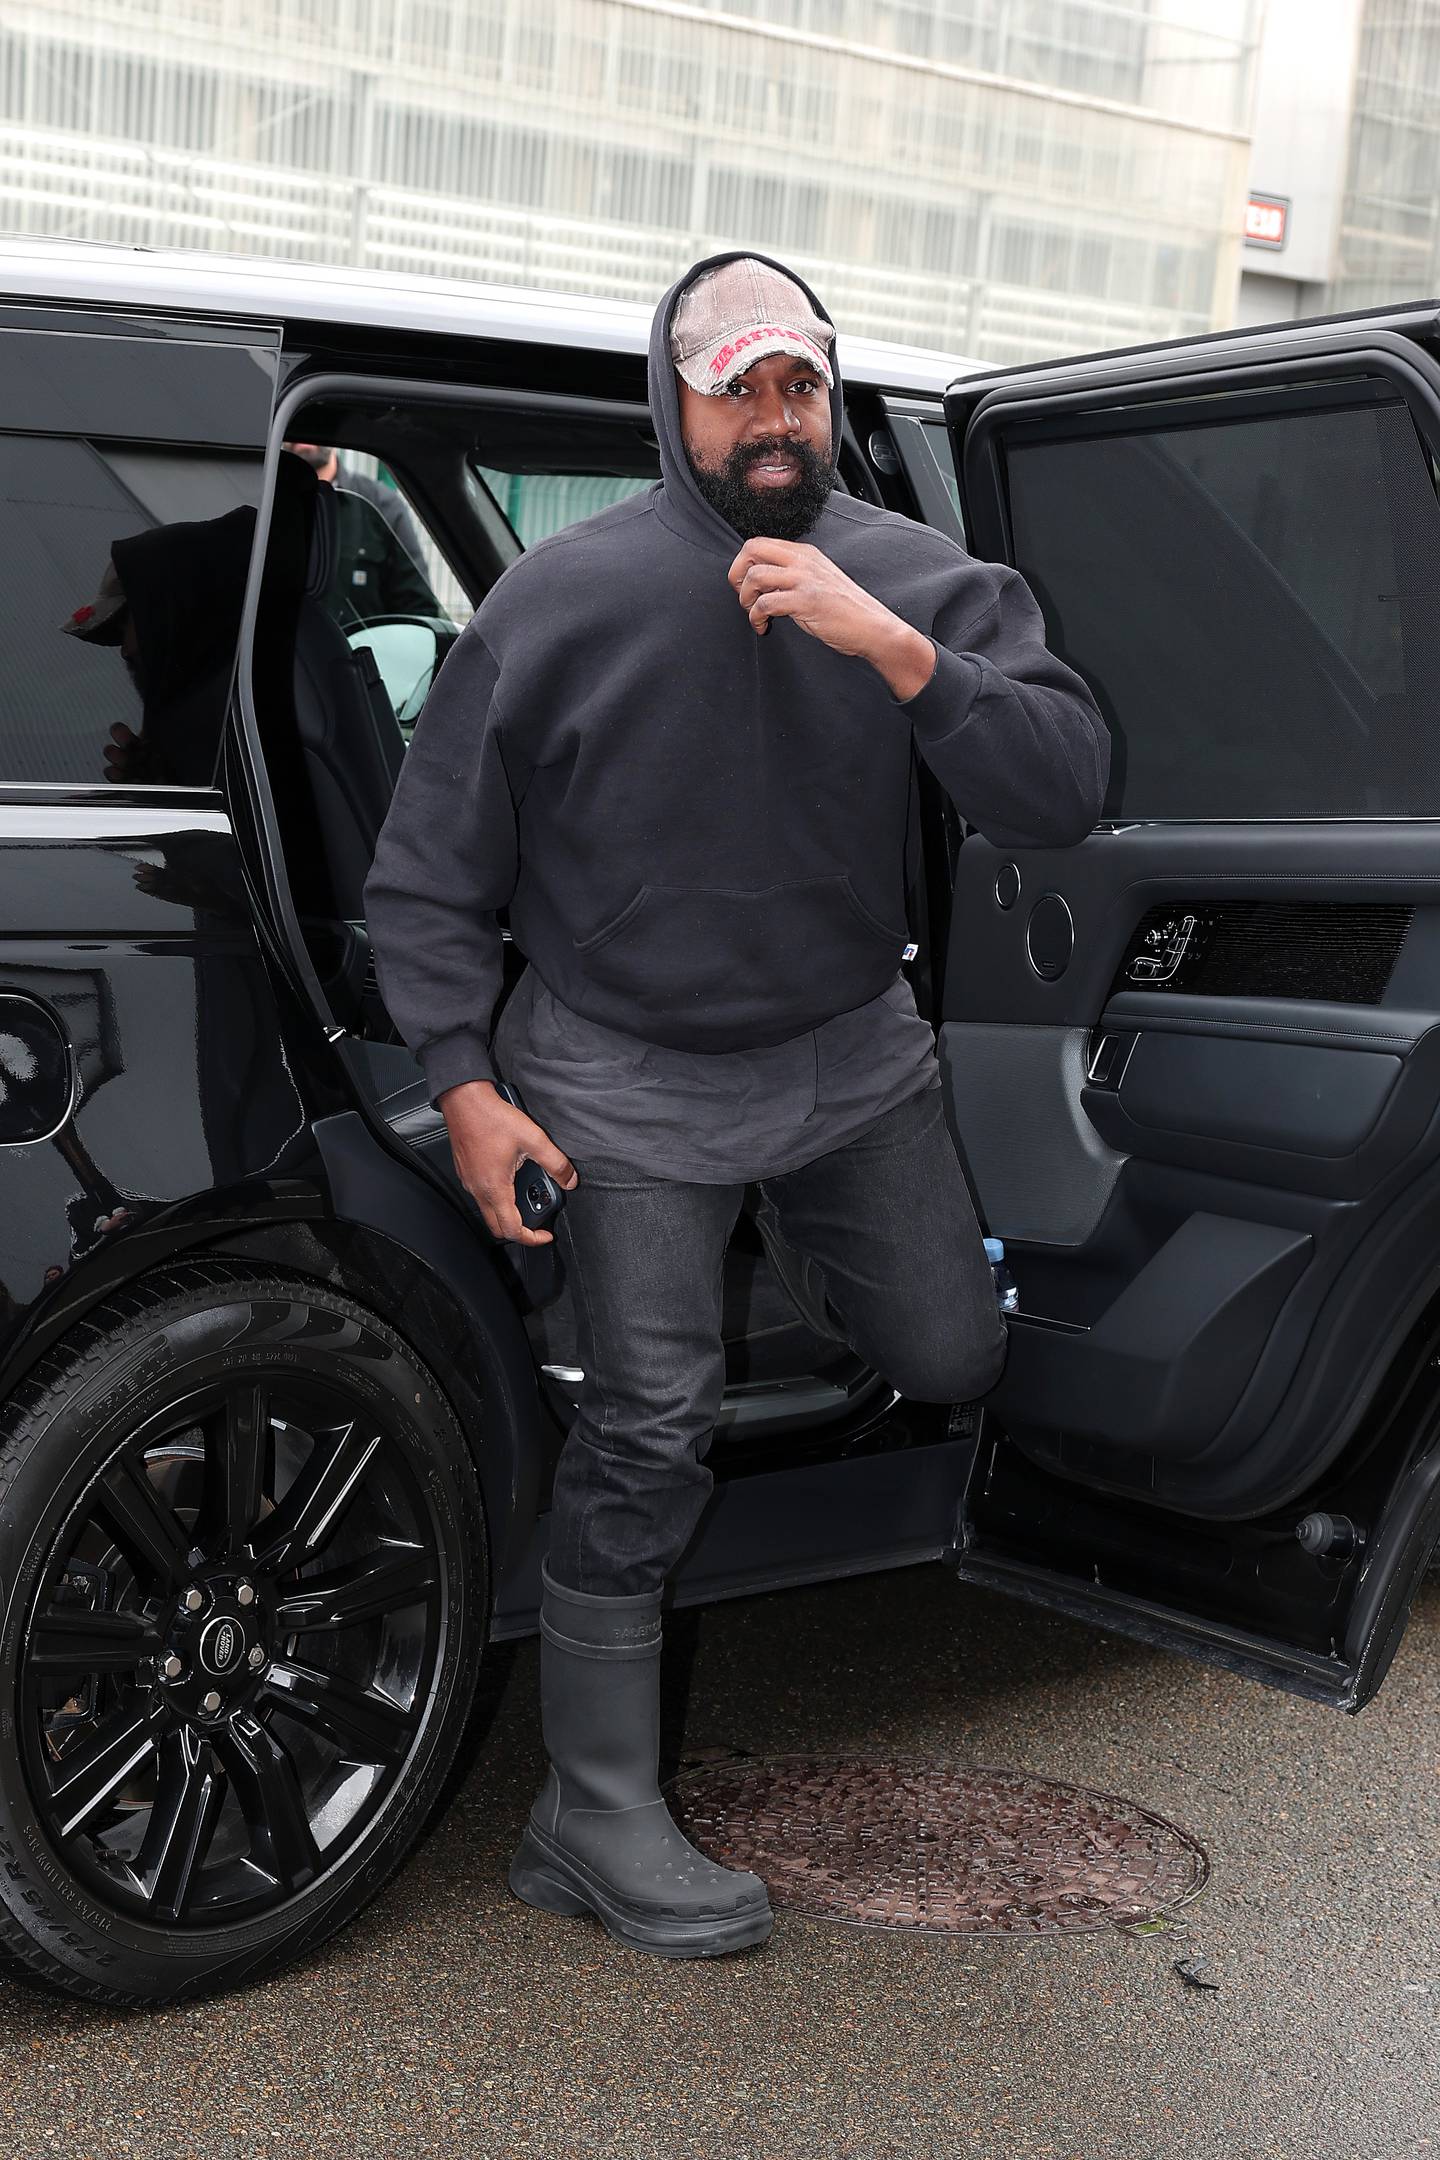 Kanye West attended several fashion shows, including Balenciaga Spring/Summer 2023, before staging his  own on Monday, Oct 3, 2022, in Paris, where he launched the controversial "White Lives Matter" T-shirt.